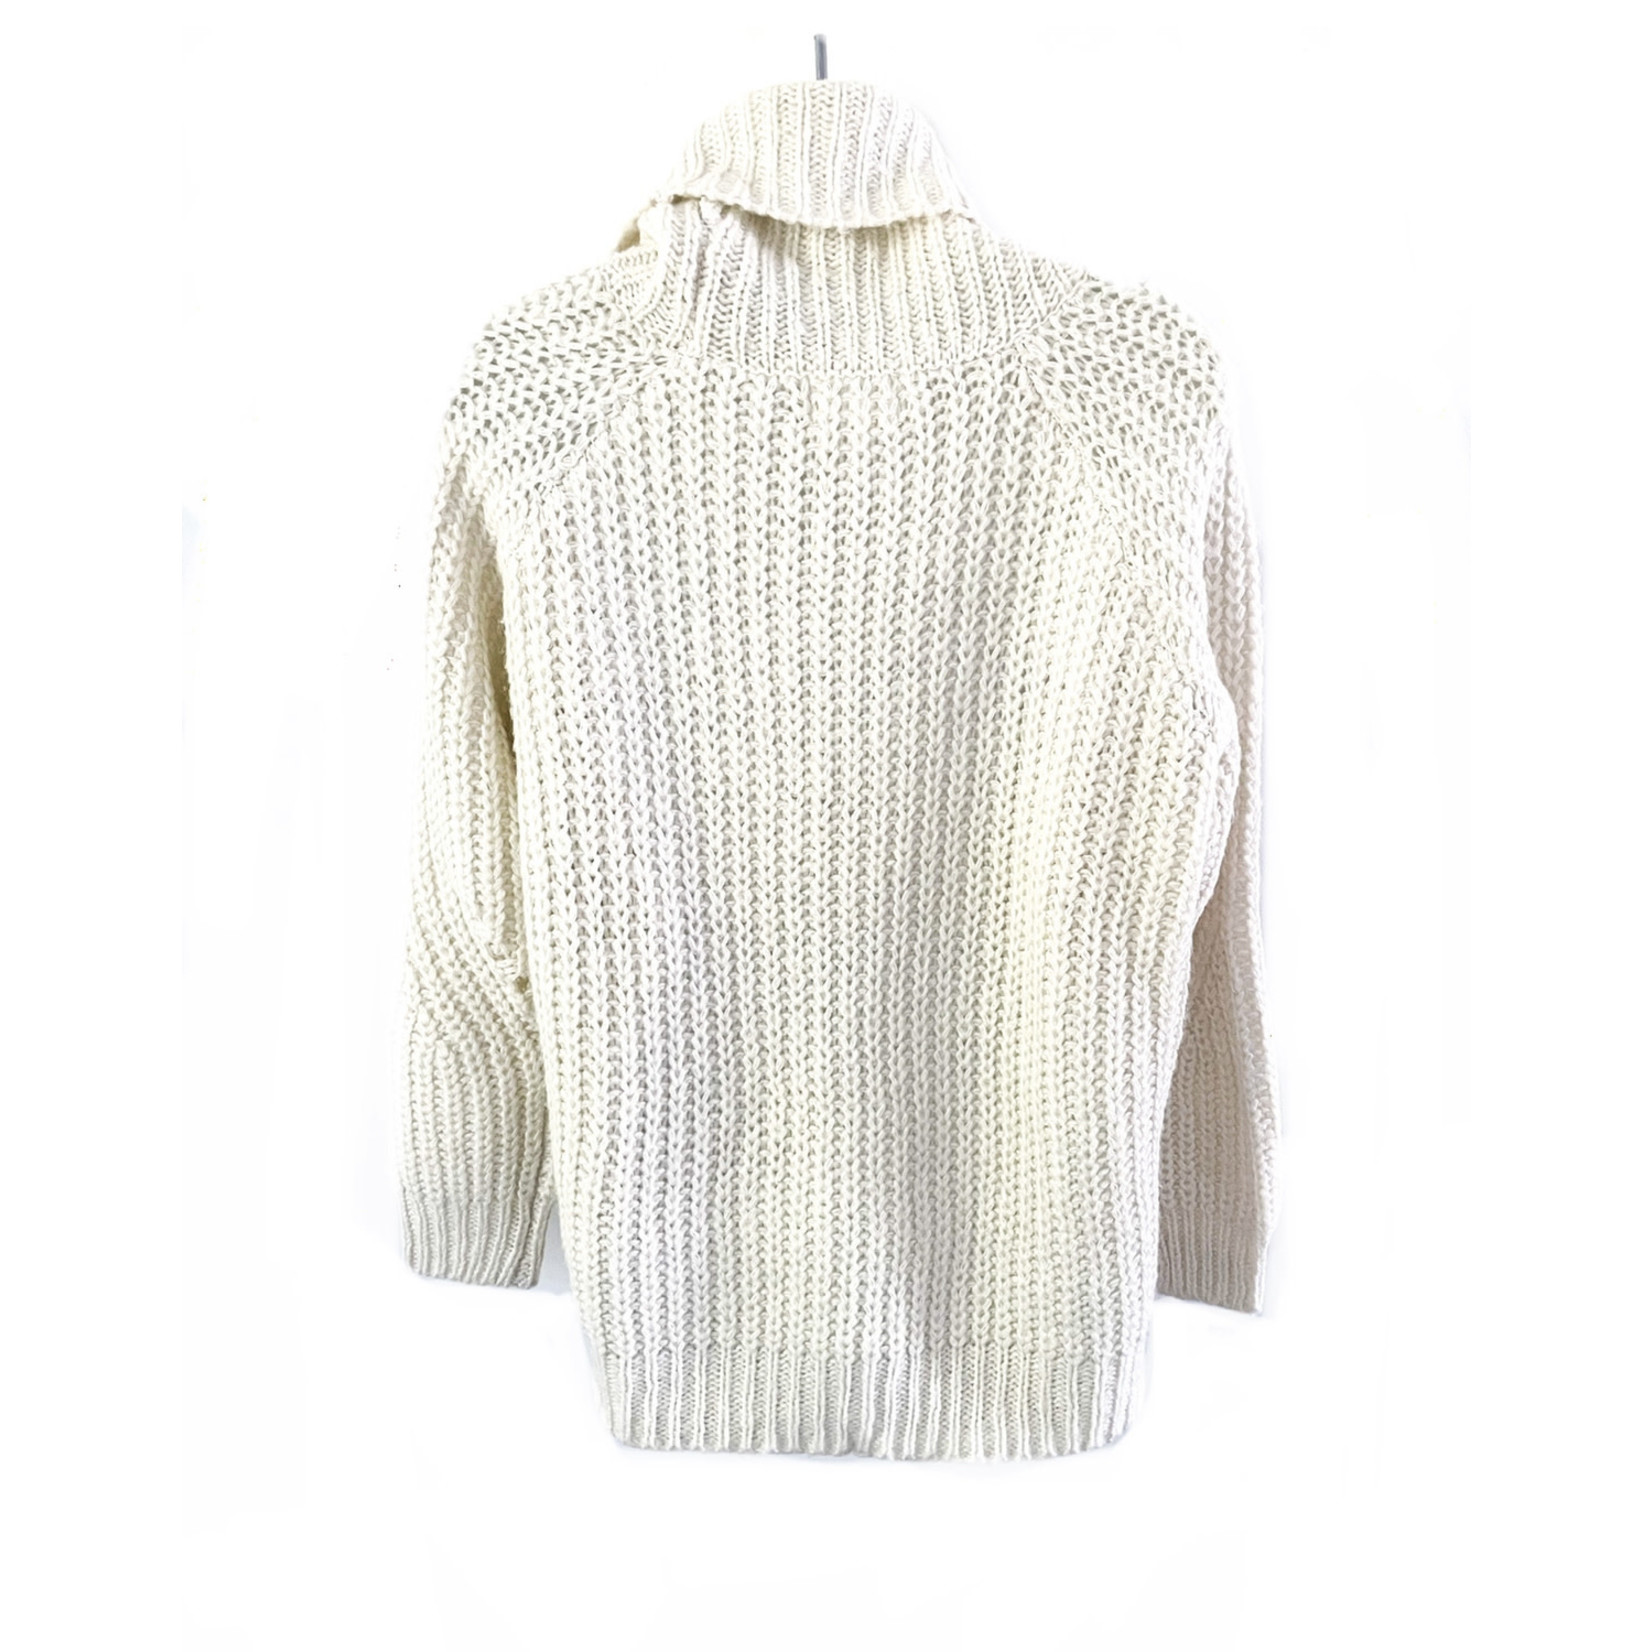 Seven Sisters Seven Sisters Knit Turtleneck Sweater - Size S